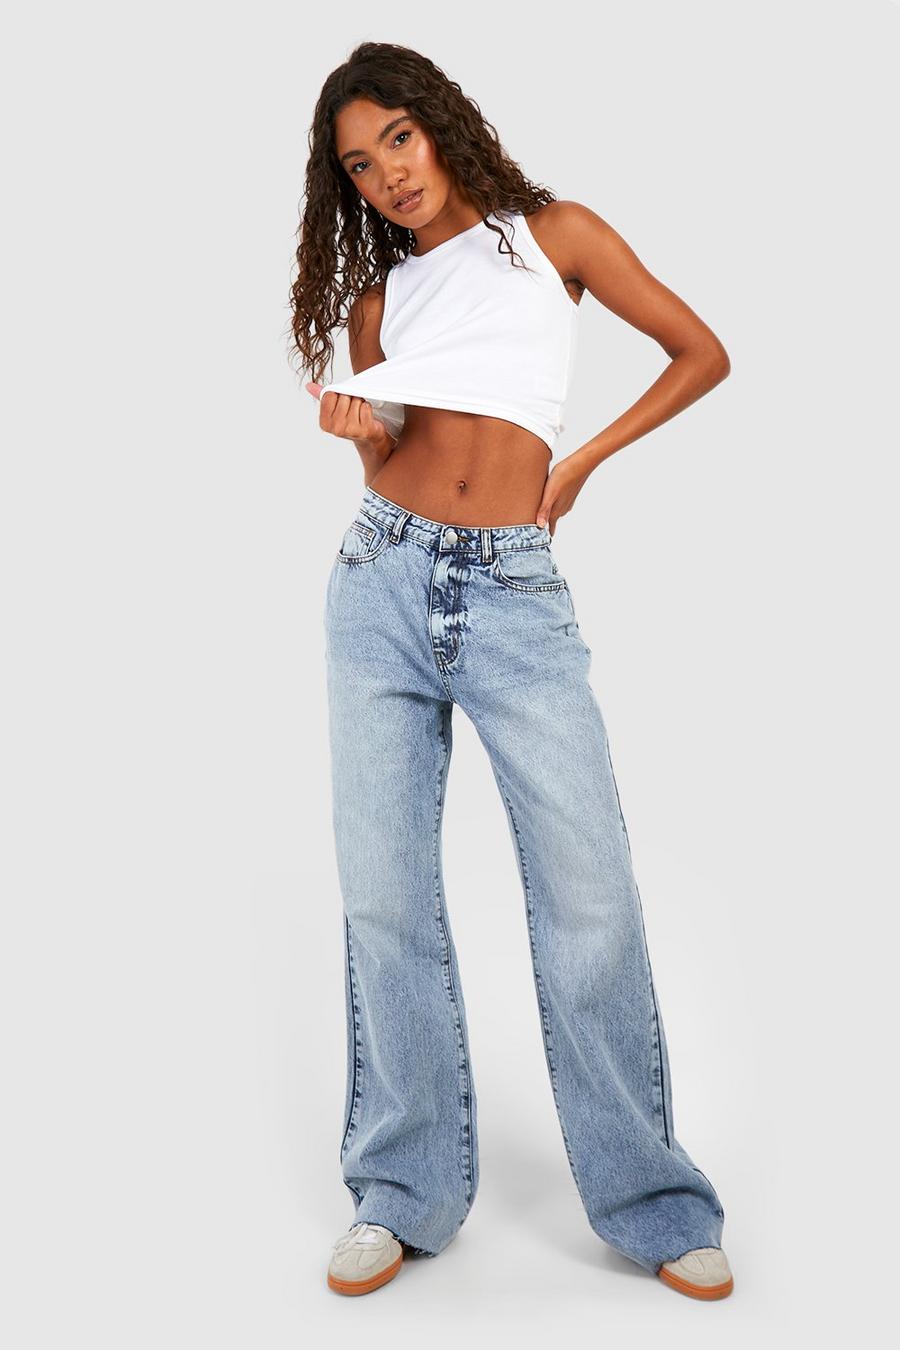 Tall Jeans, Shop Jeans for Tall Women